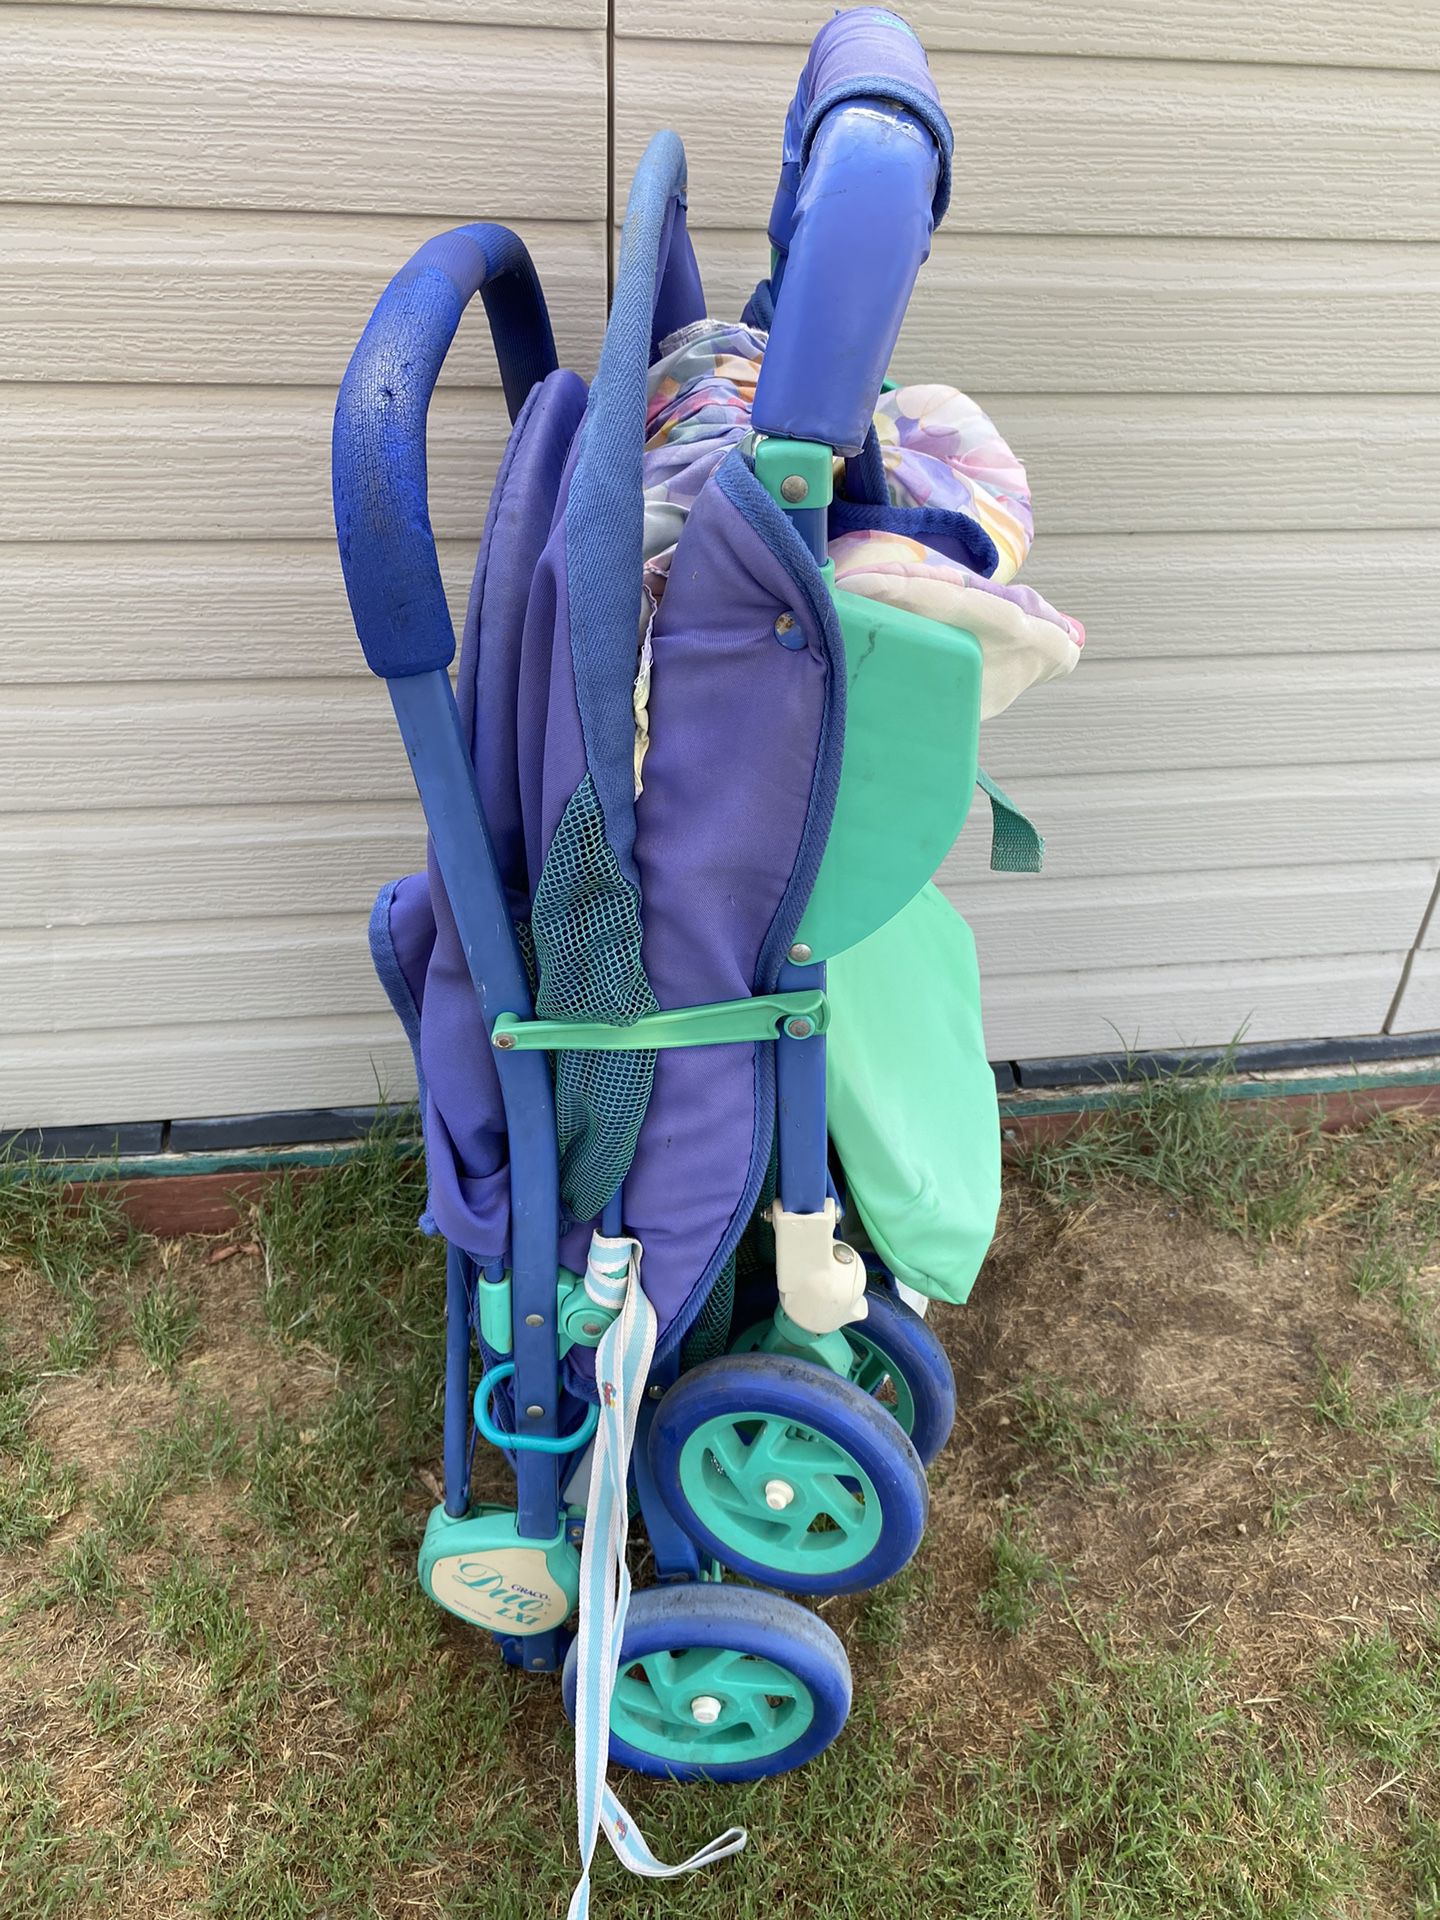 Vintage 80s-90s Graco Duo XLI Double Stroller Rare Hard To Find See Puctures For Conditions